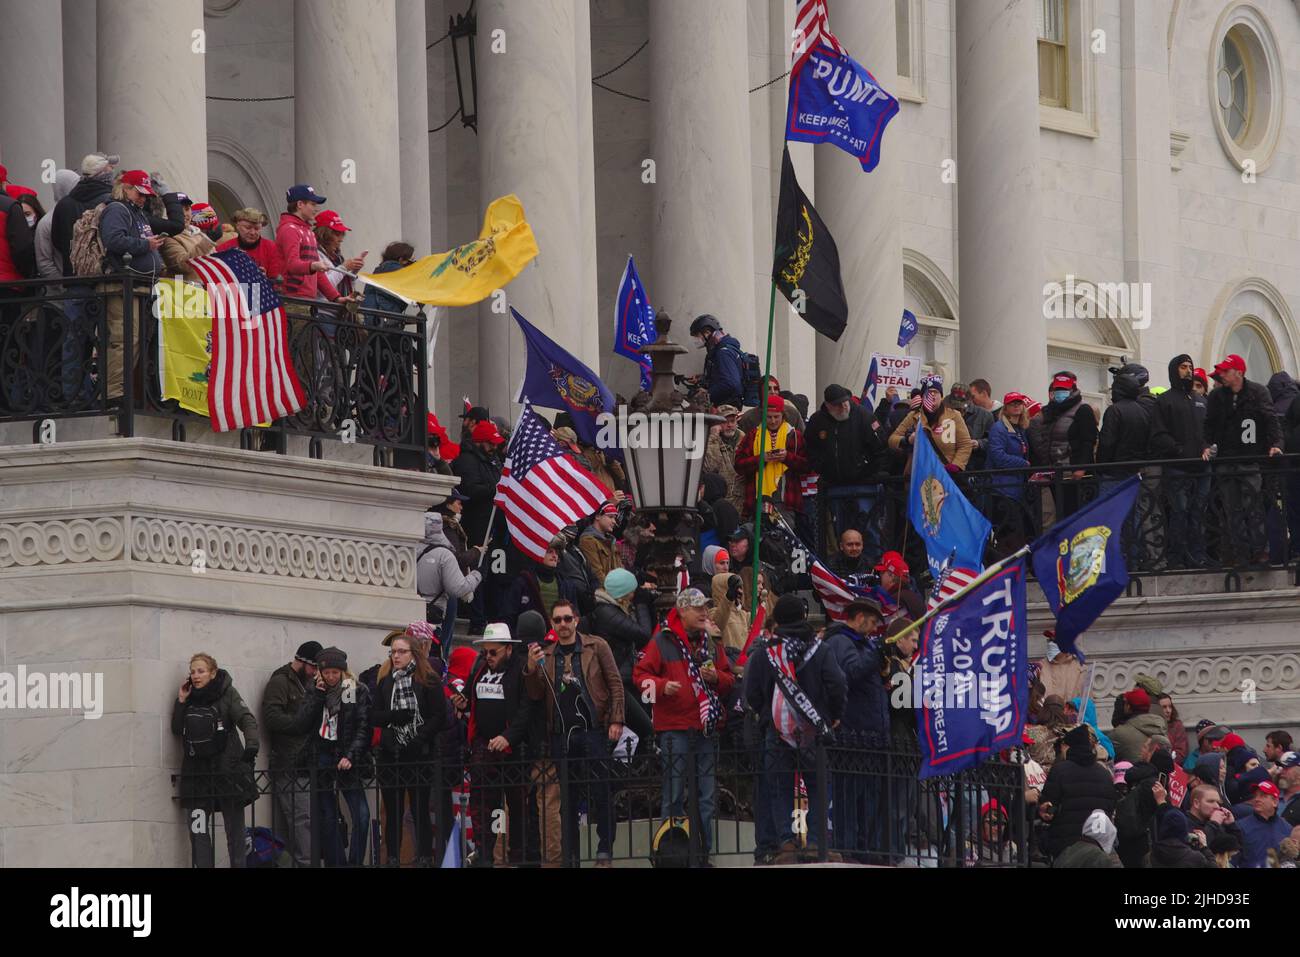 Supporters of then-President Donald Trump occupy the east front of the U.S. Capitol during the riots on 6 Jan 2021. Stock Photo